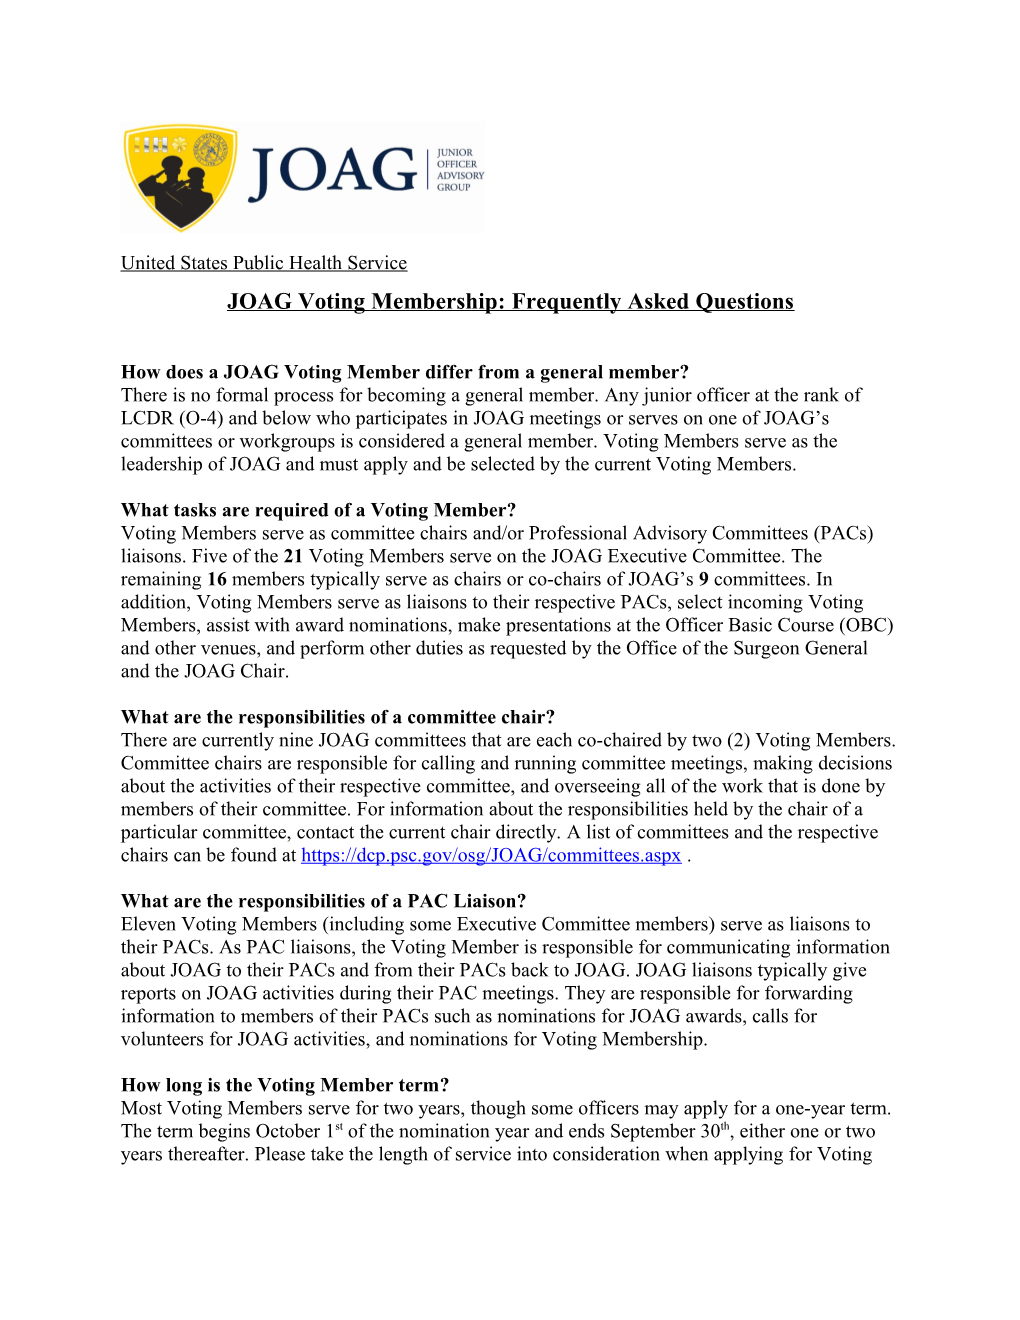 JOAG Voting Membership: Frequently Asked Questions